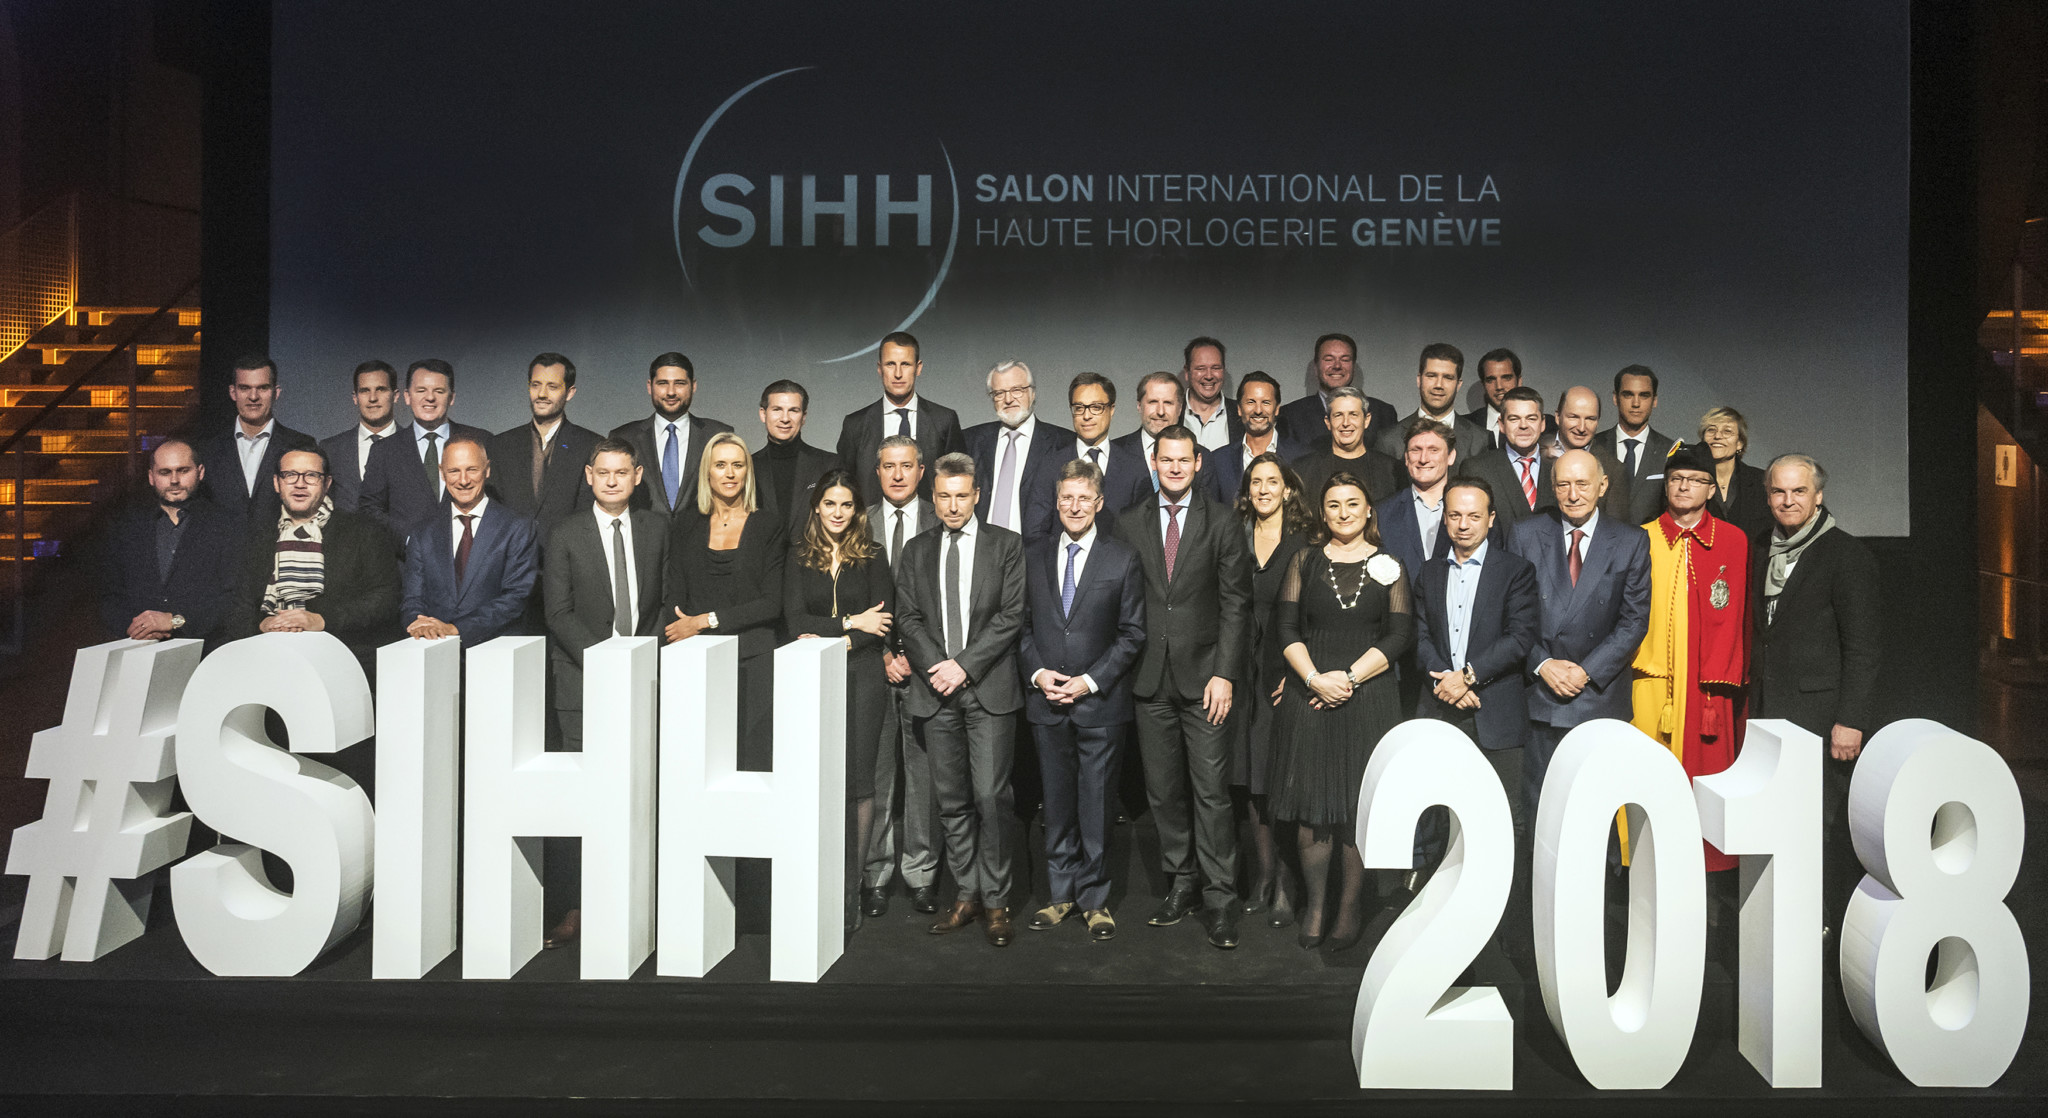 Sihh 2018 party